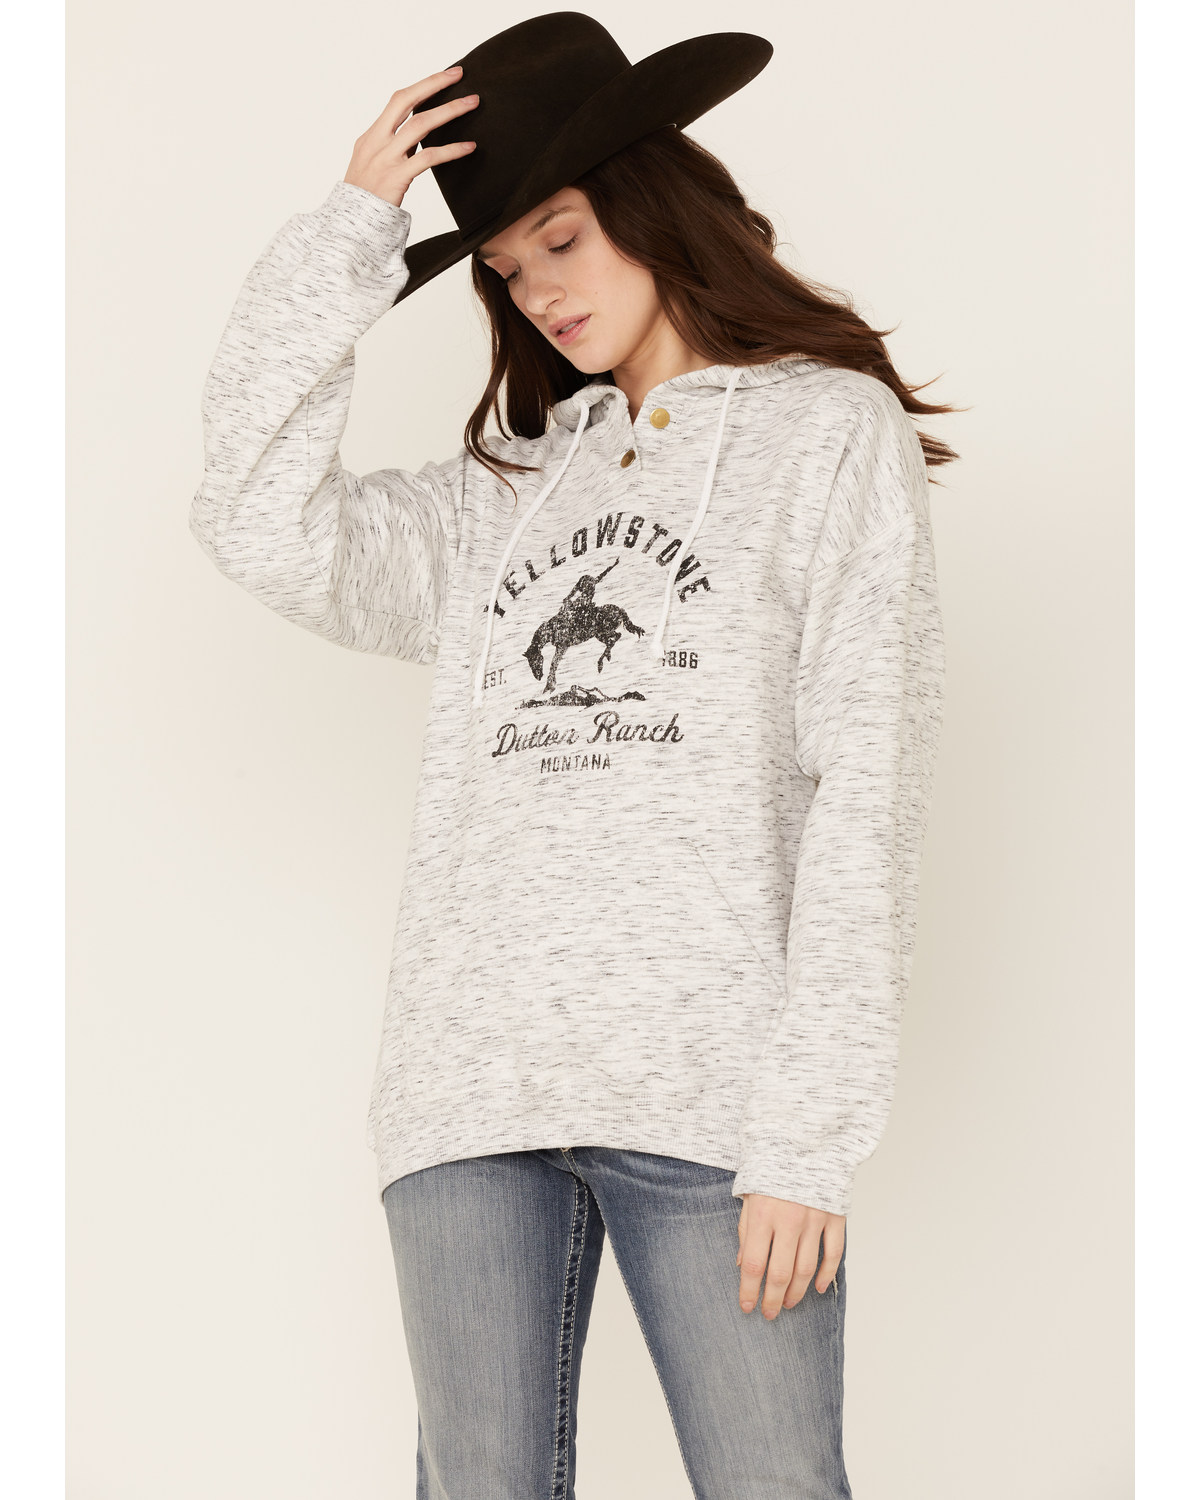 Paramount Network's Yellowstone Women's Bronco Graphic Hooded Pullover